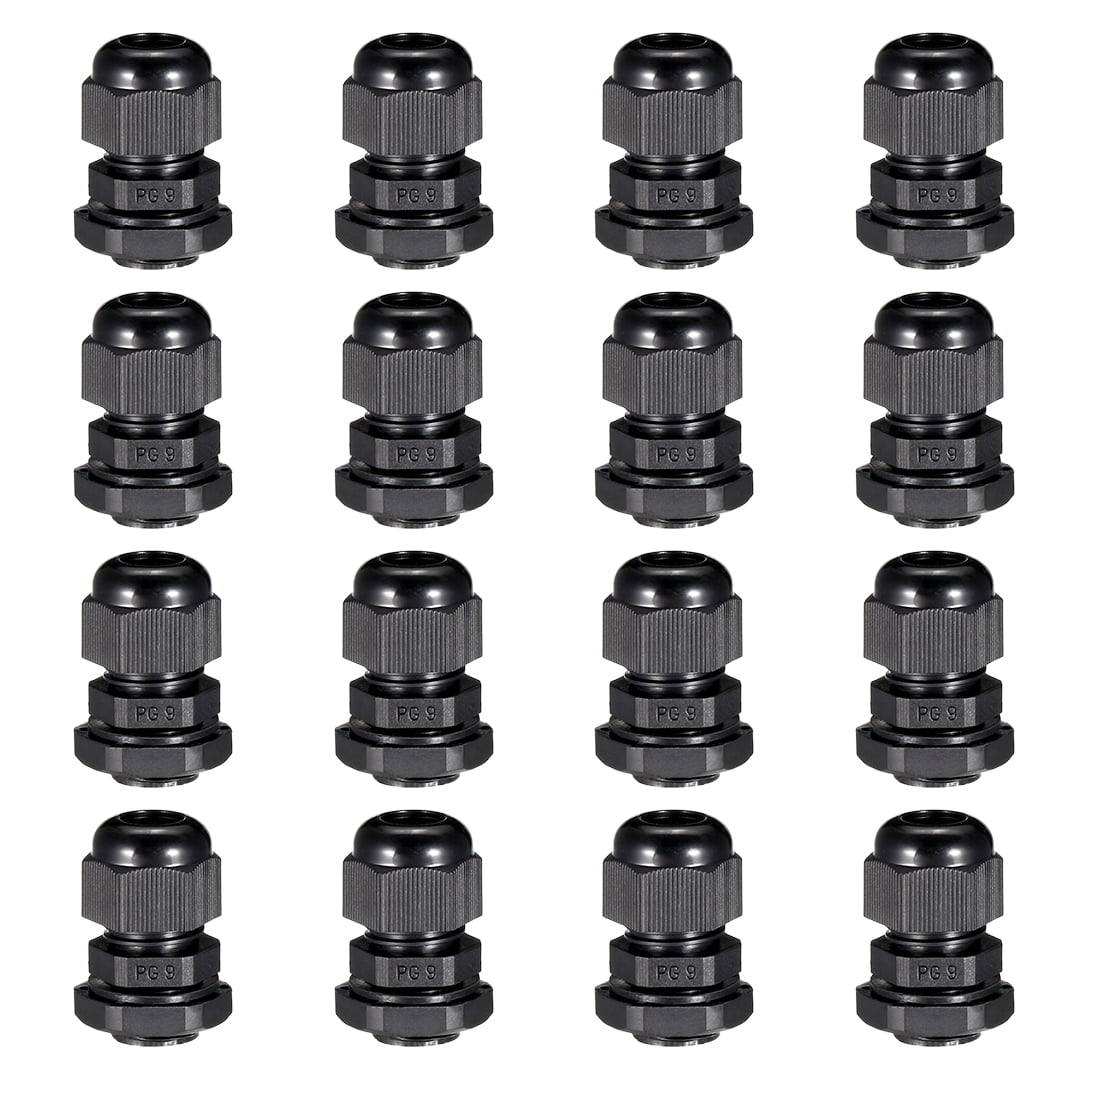 Plastic Waterproof Adjustable Cable Glands Joints,White PG11 Nylon Cable Gland 25Piece